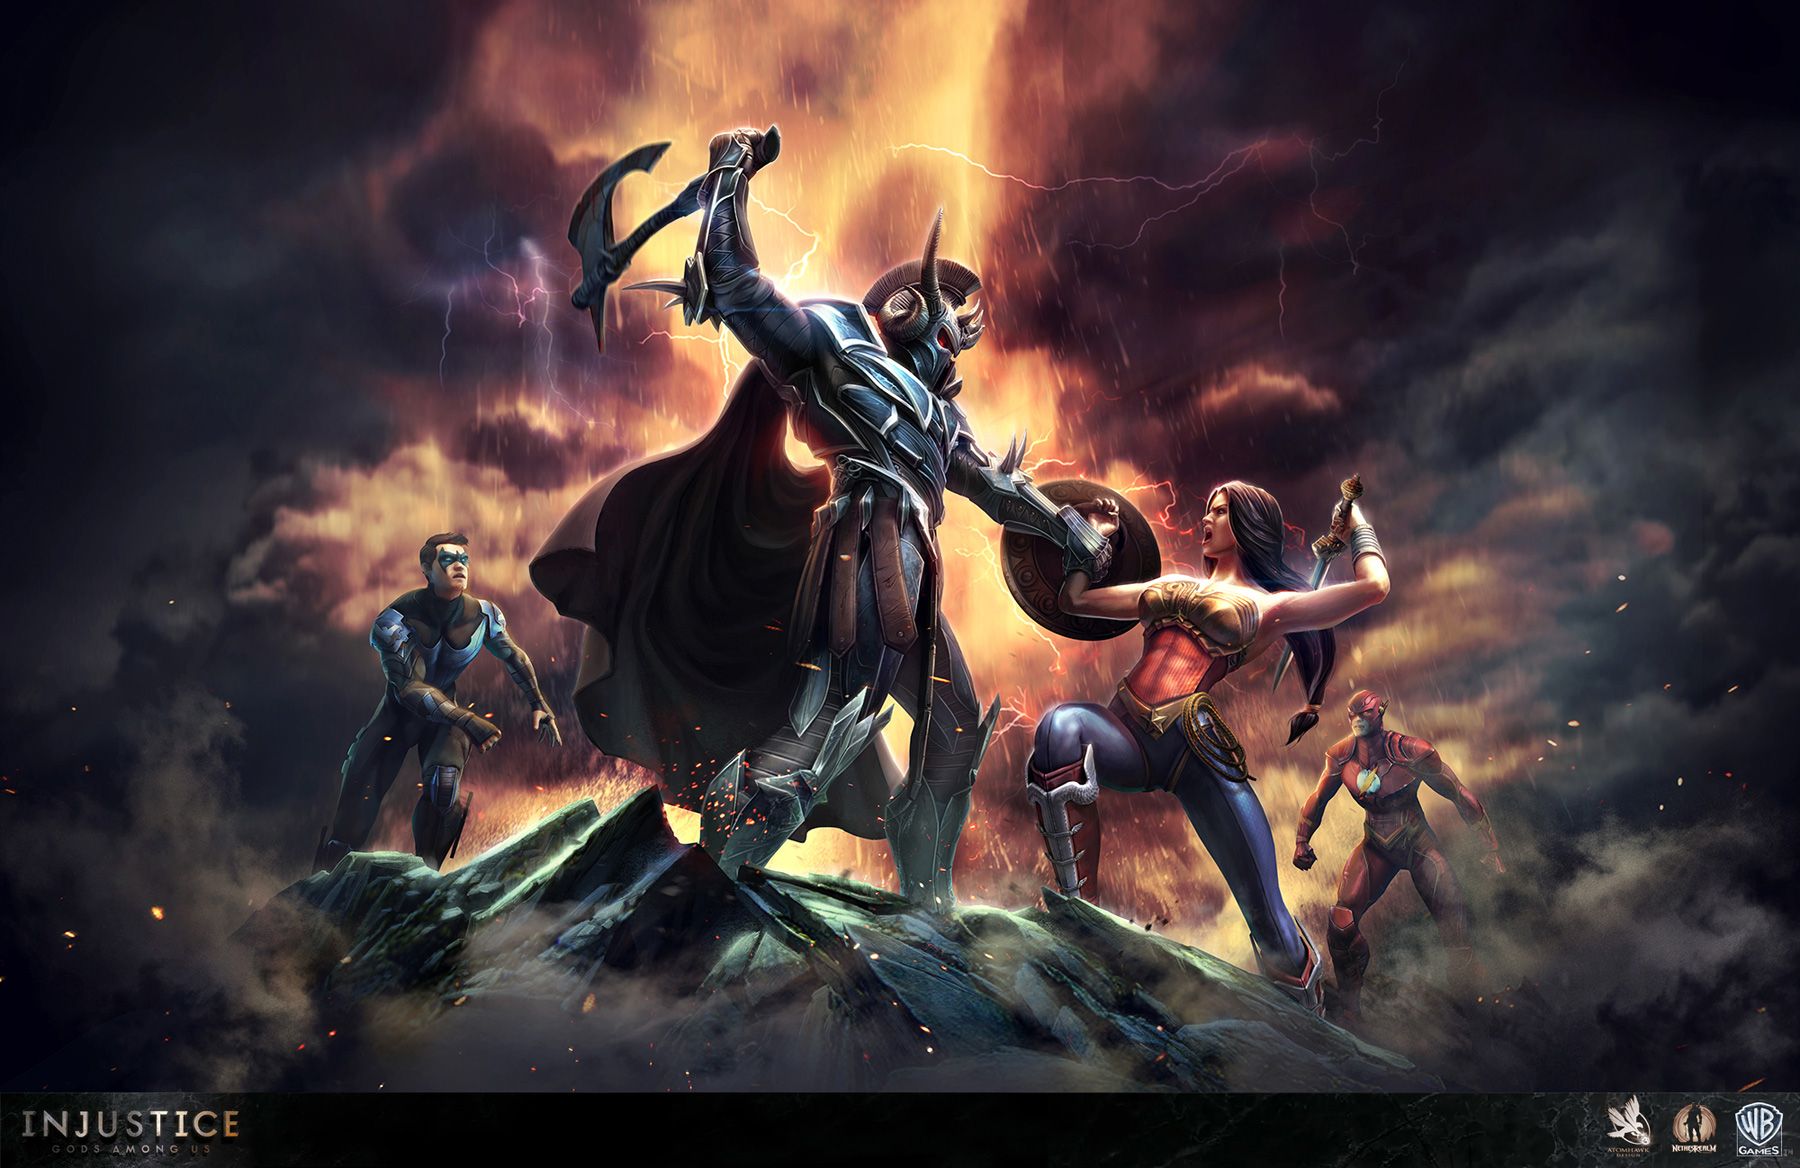 HD wallpaper injustice: gods among us, video game, ares (dc comics), barry allen, dick grayson, flash, nightwing, wonder woman, injustice